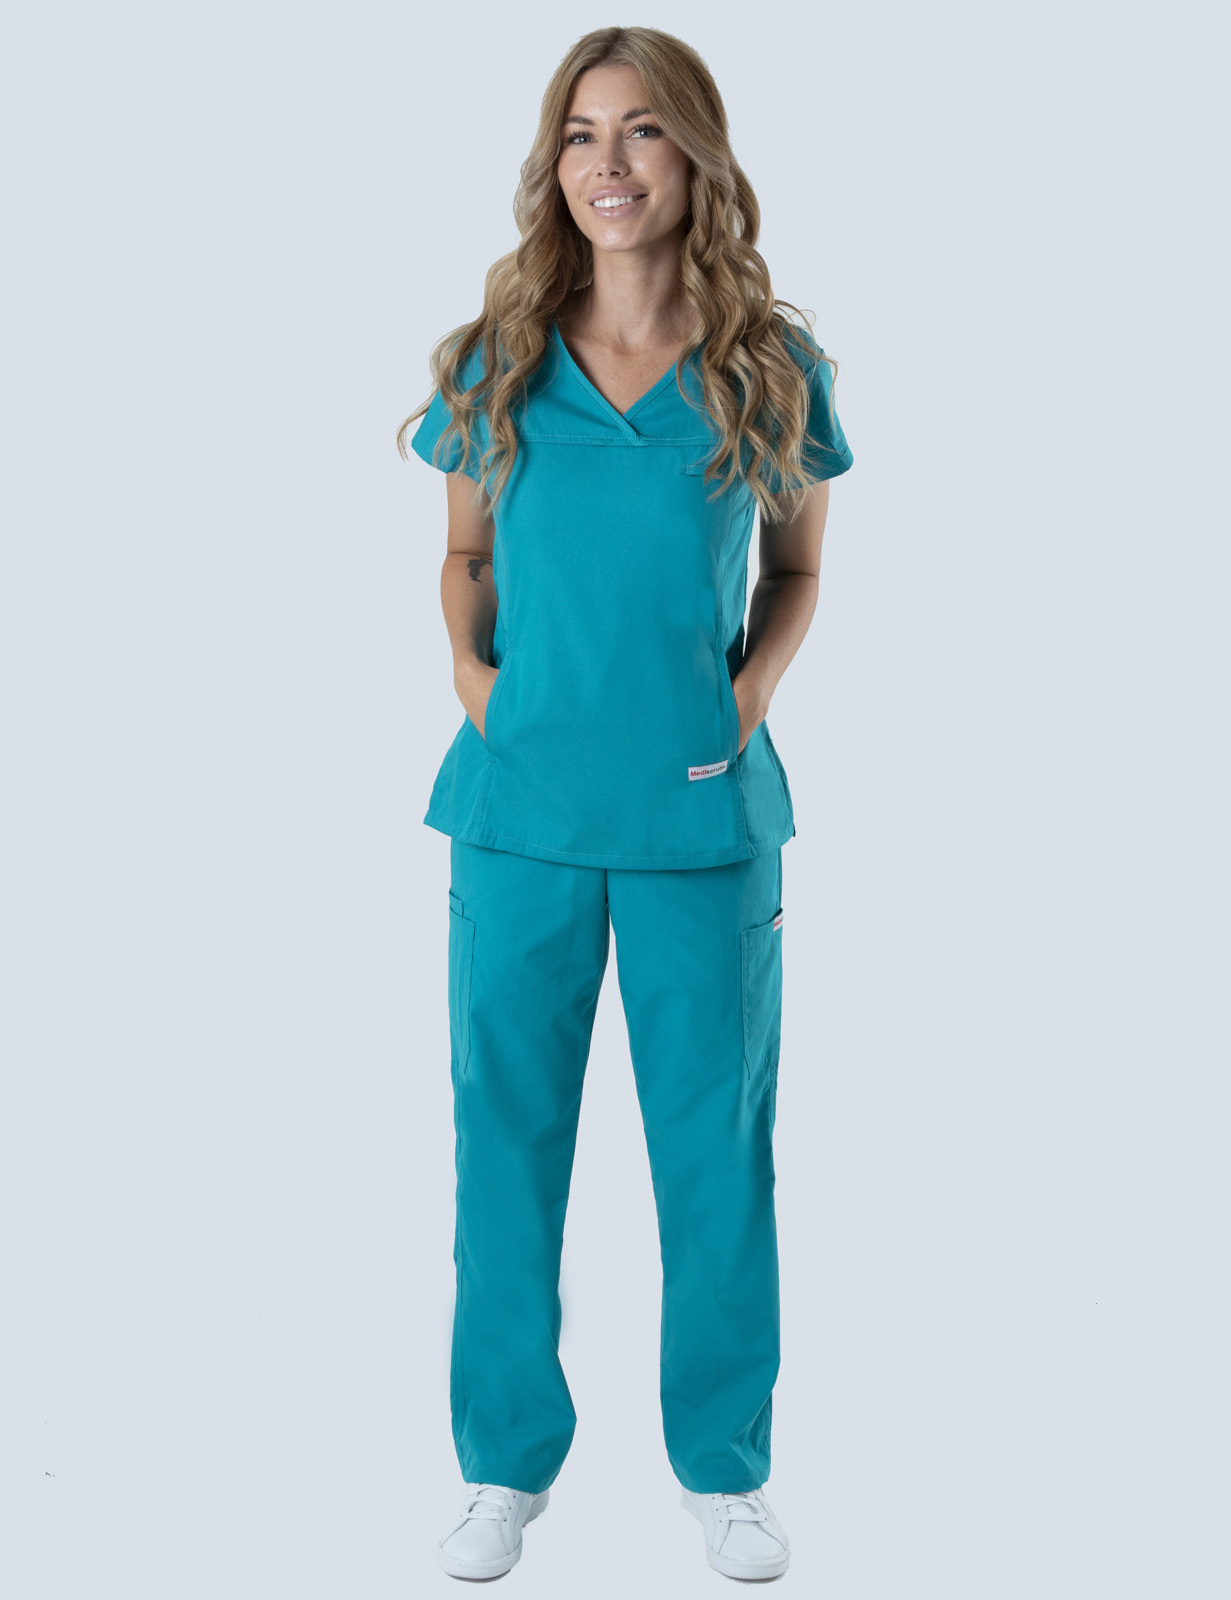 Tweed Health Super Clinic (Women's Fit Solid Scrub Top and Regular Pants in Teal incl Logos)